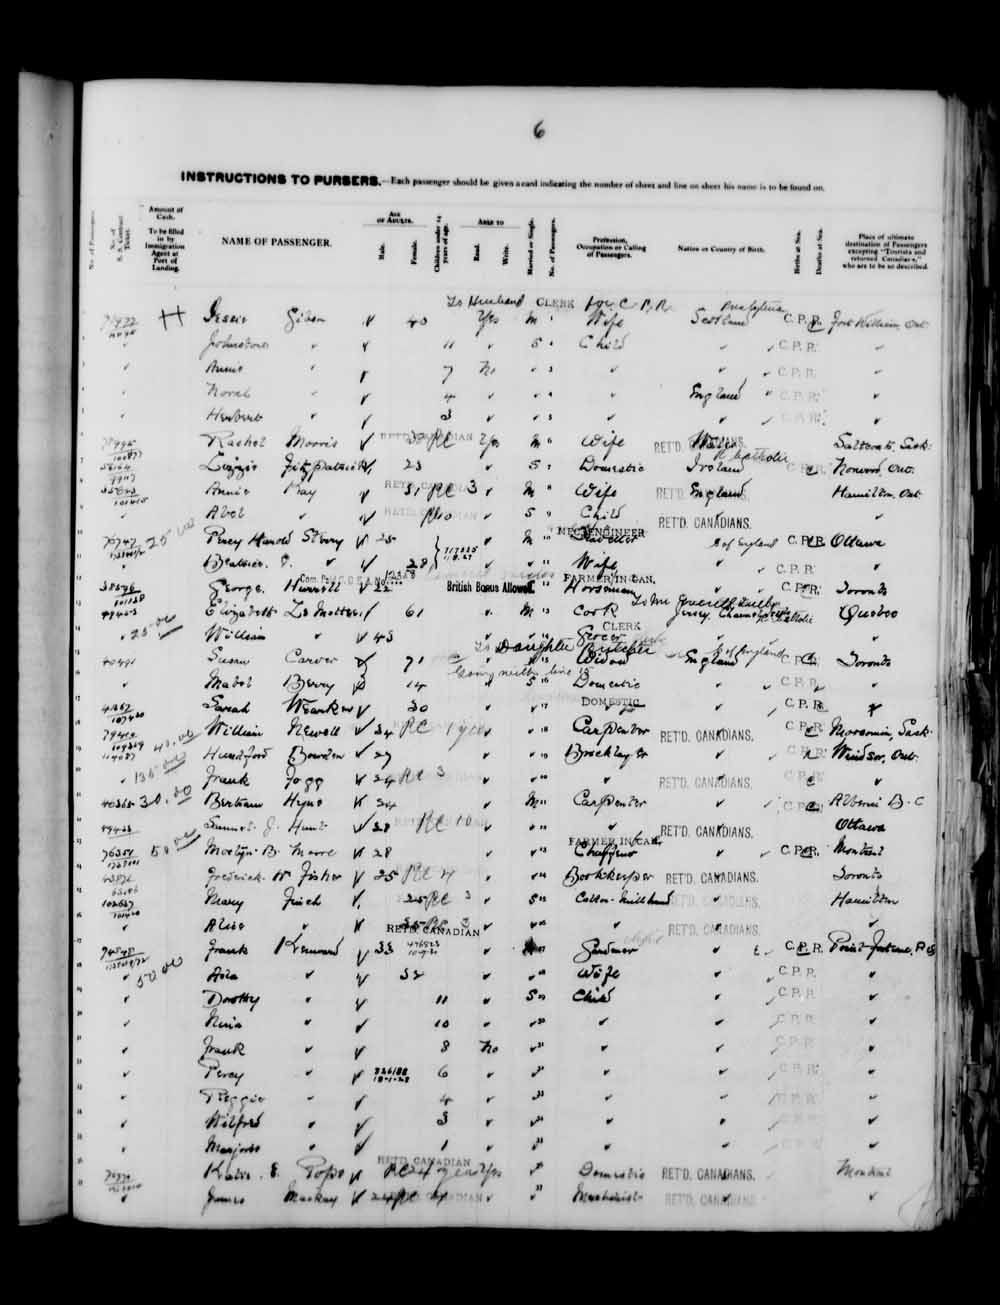 Digitized page of Quebec Passenger Lists for Image No.: e003591577